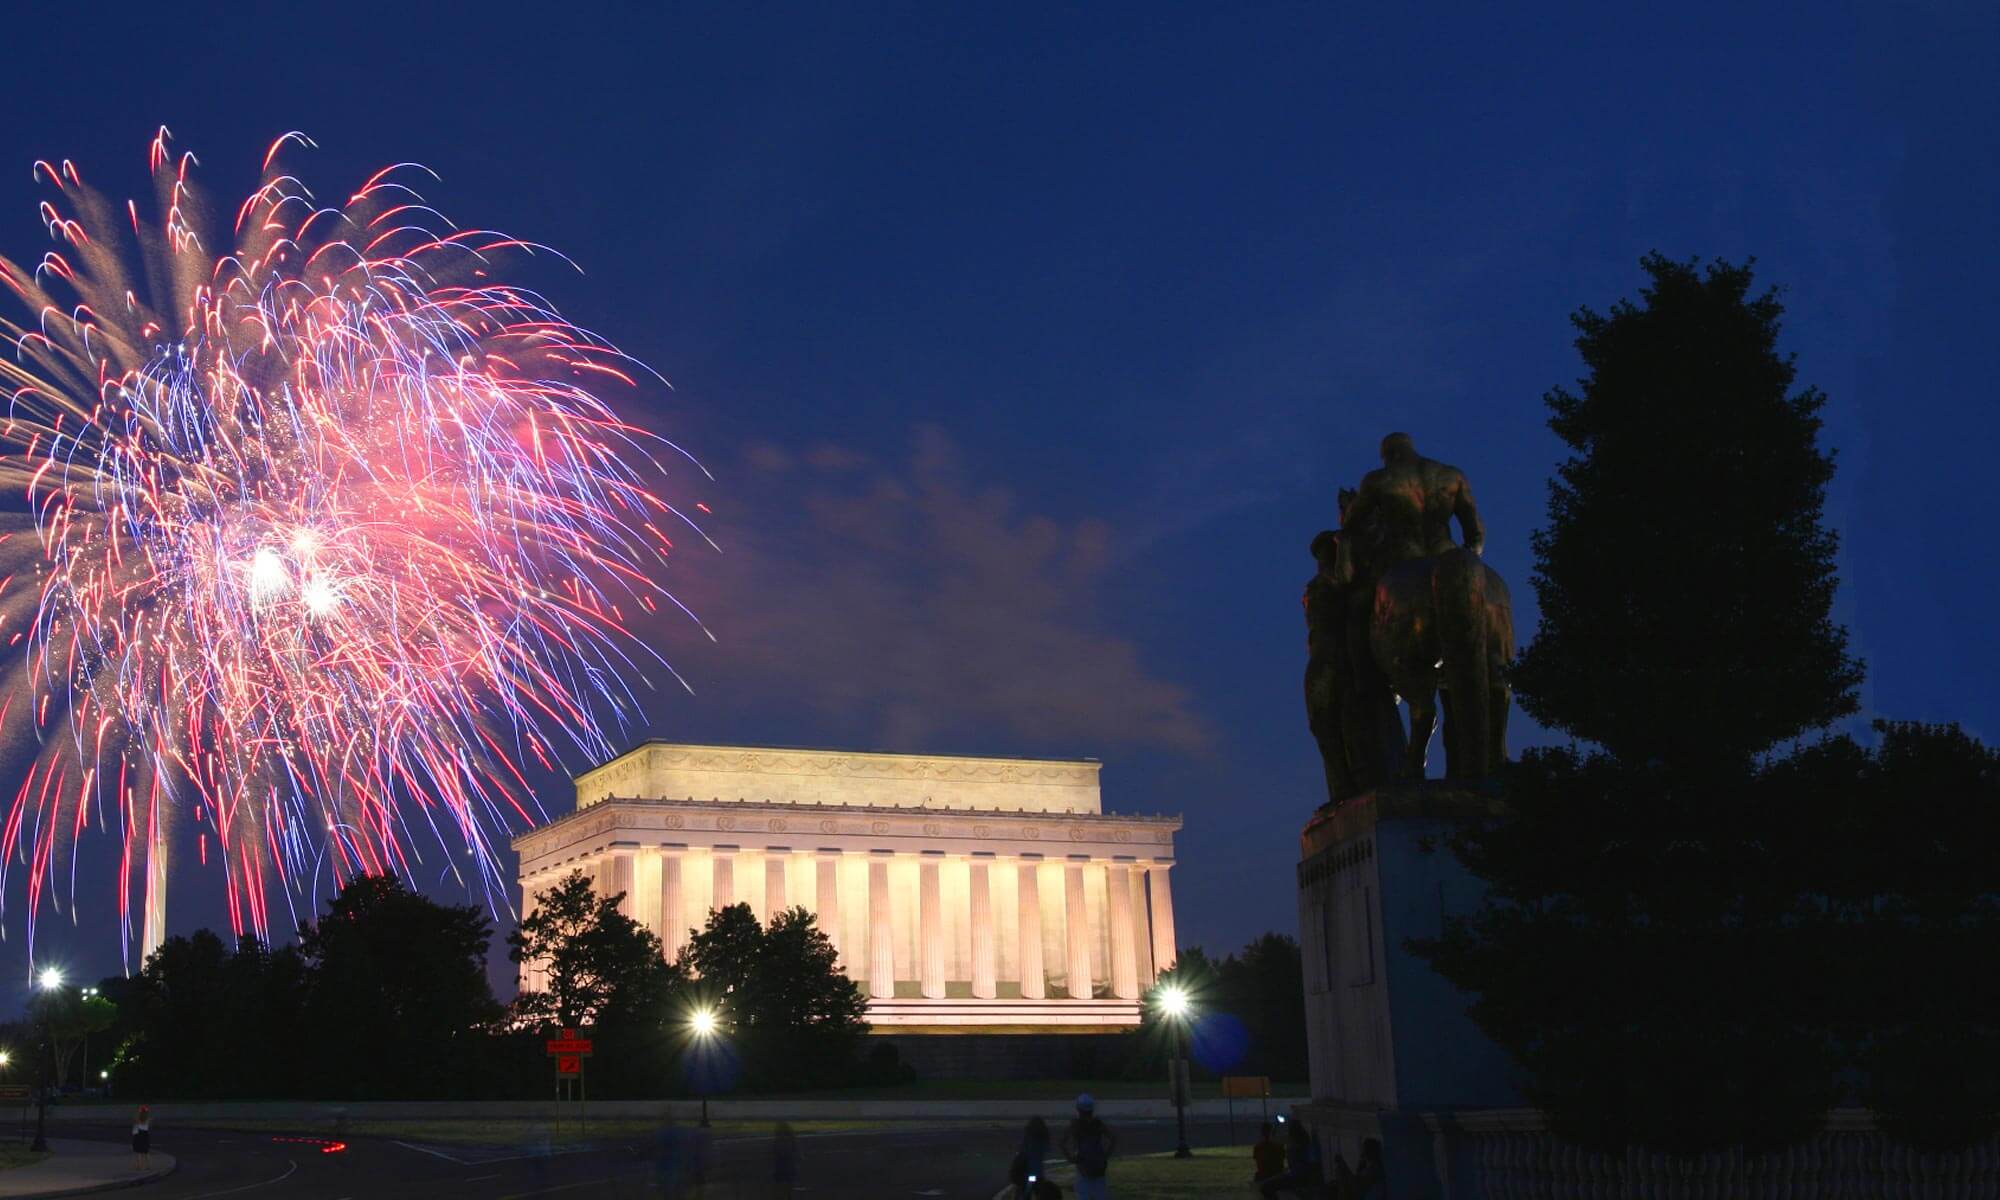 Picture taken from the foot of the Arlington Memorial Bridge of the Lincoln Memorial at night along with a fireworks display in Washington DC